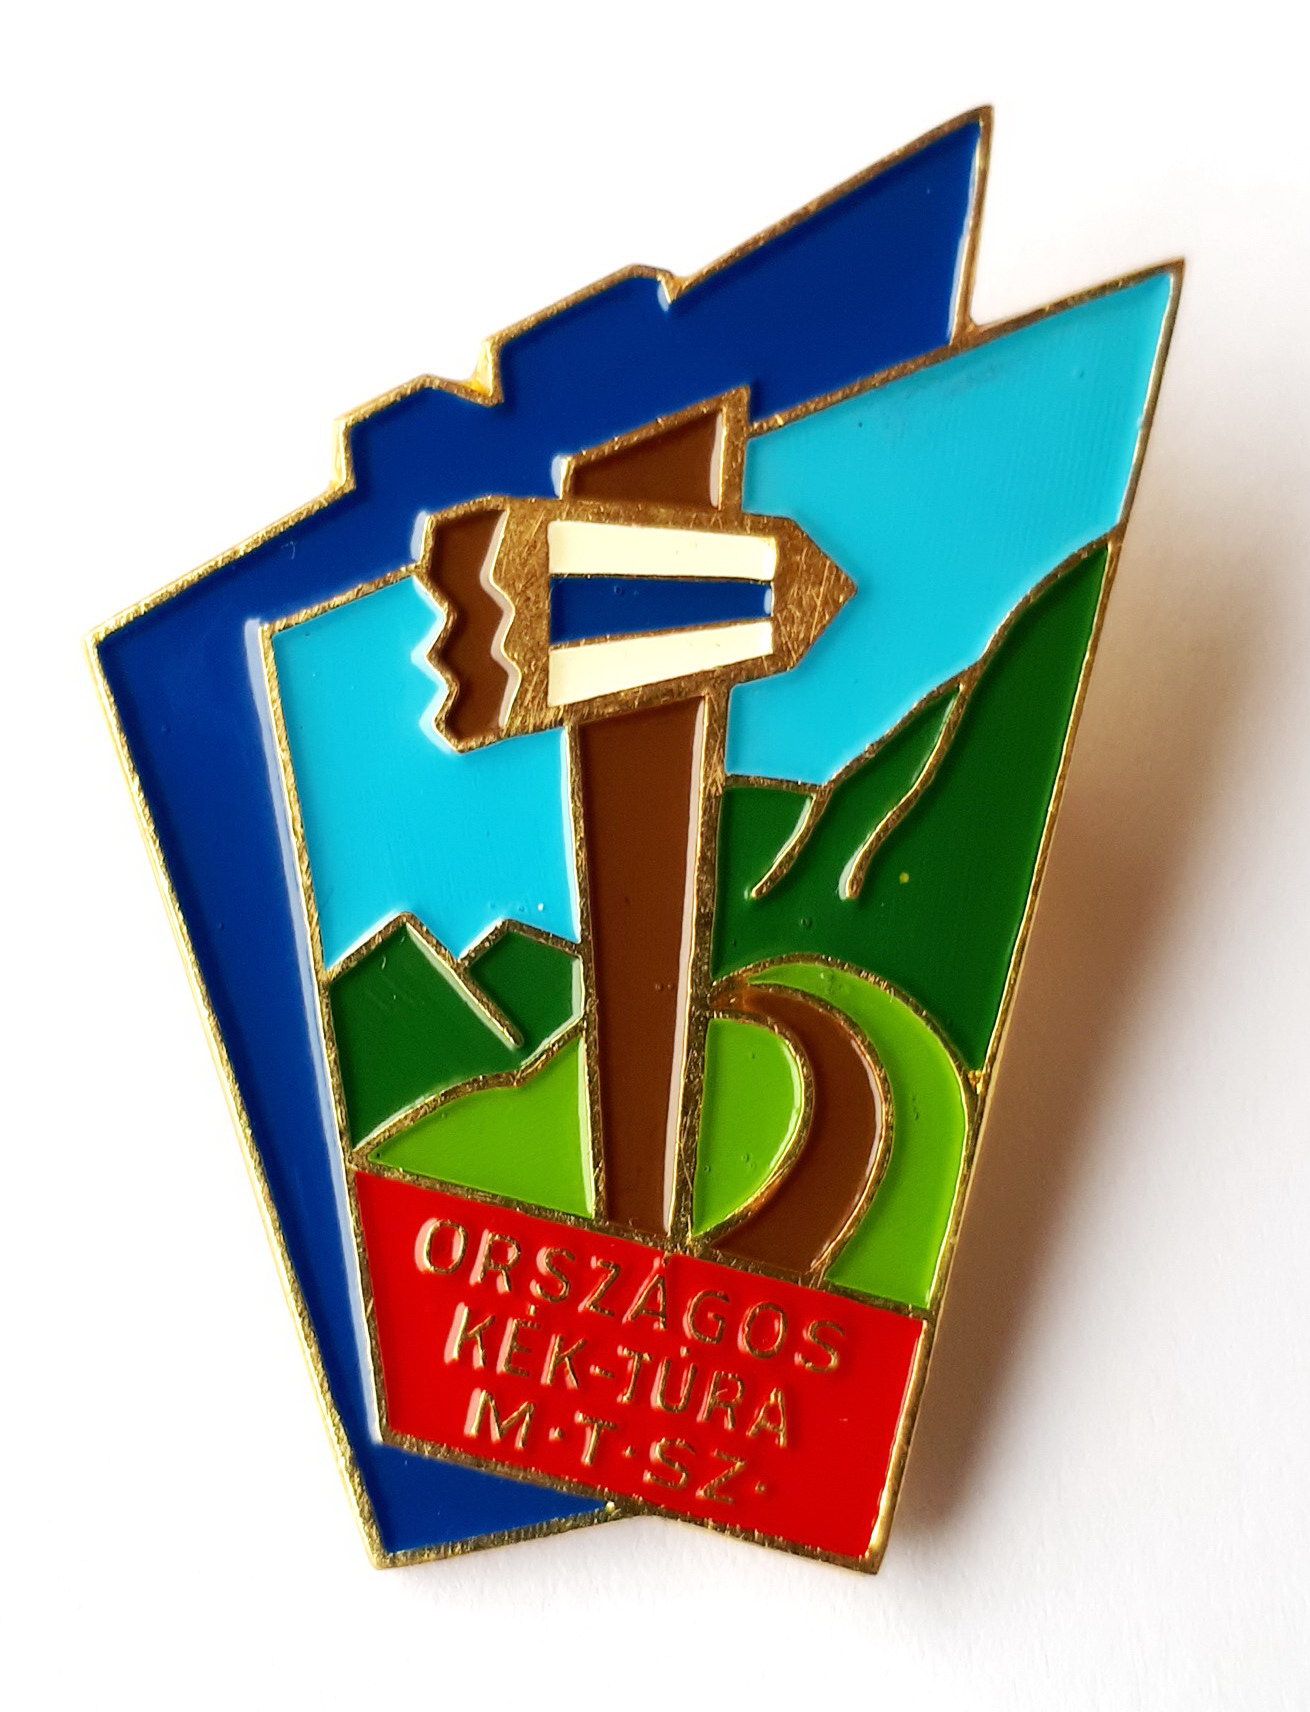 The badge of the National Blue Trail